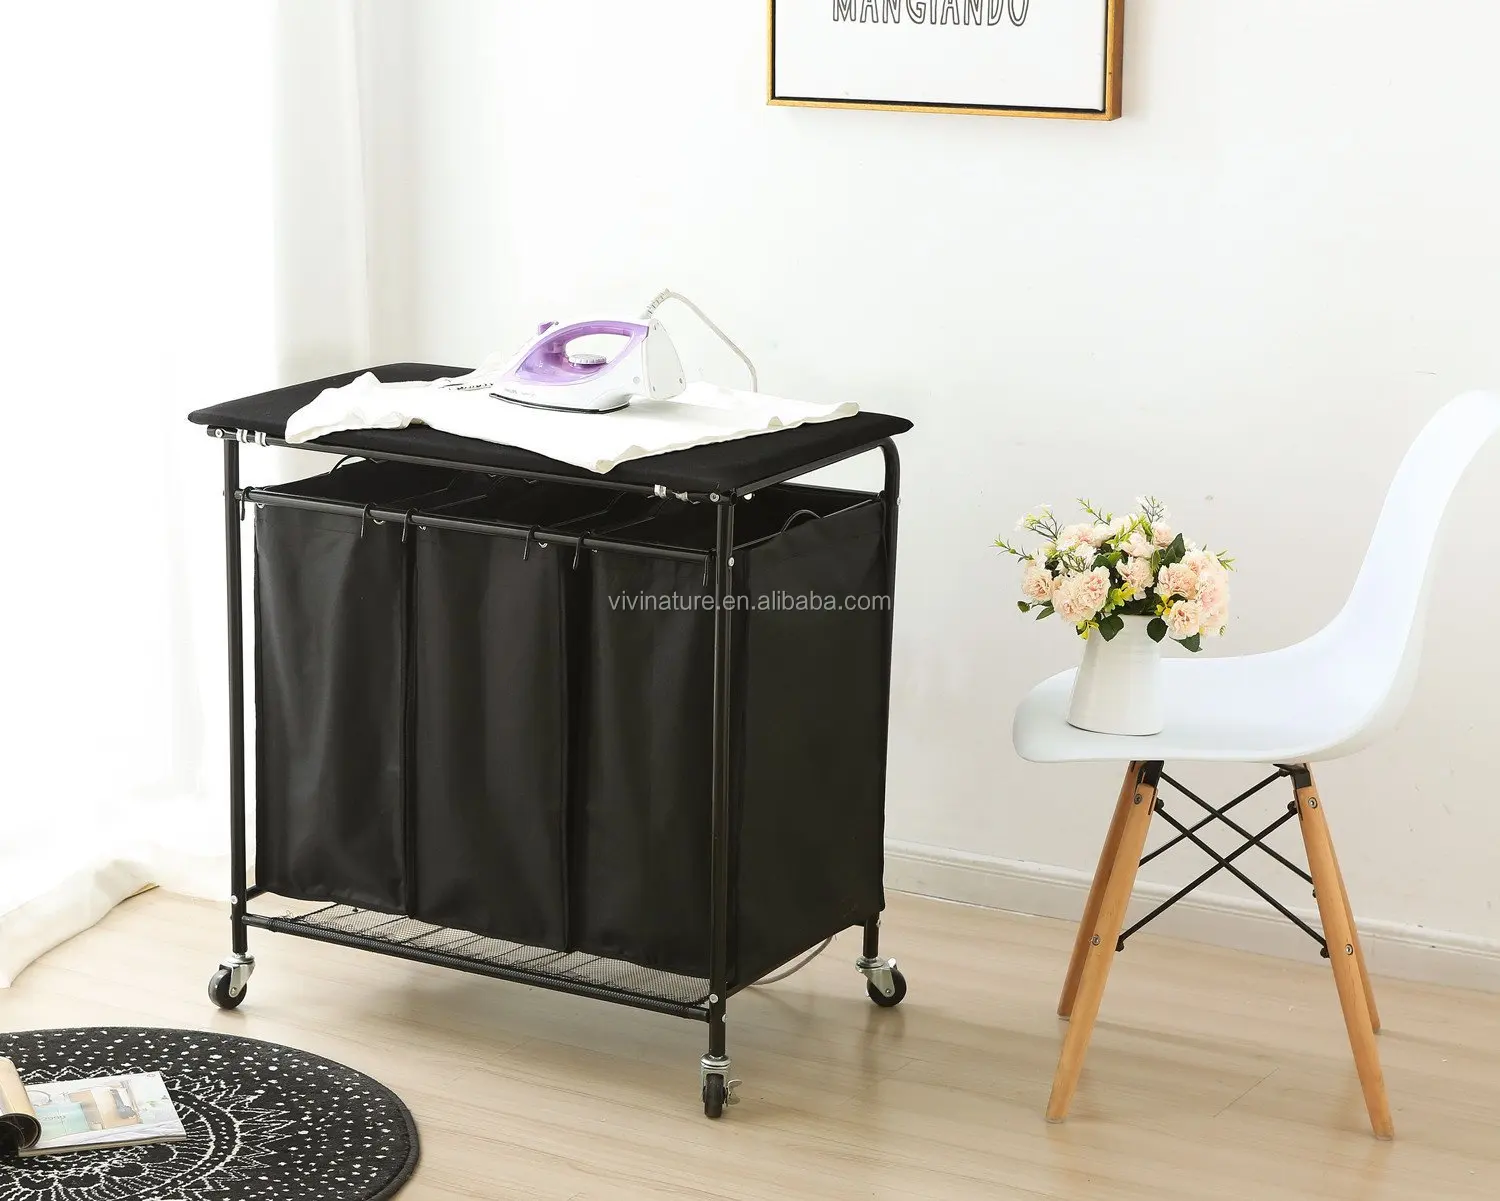 laundry sorter with folding table